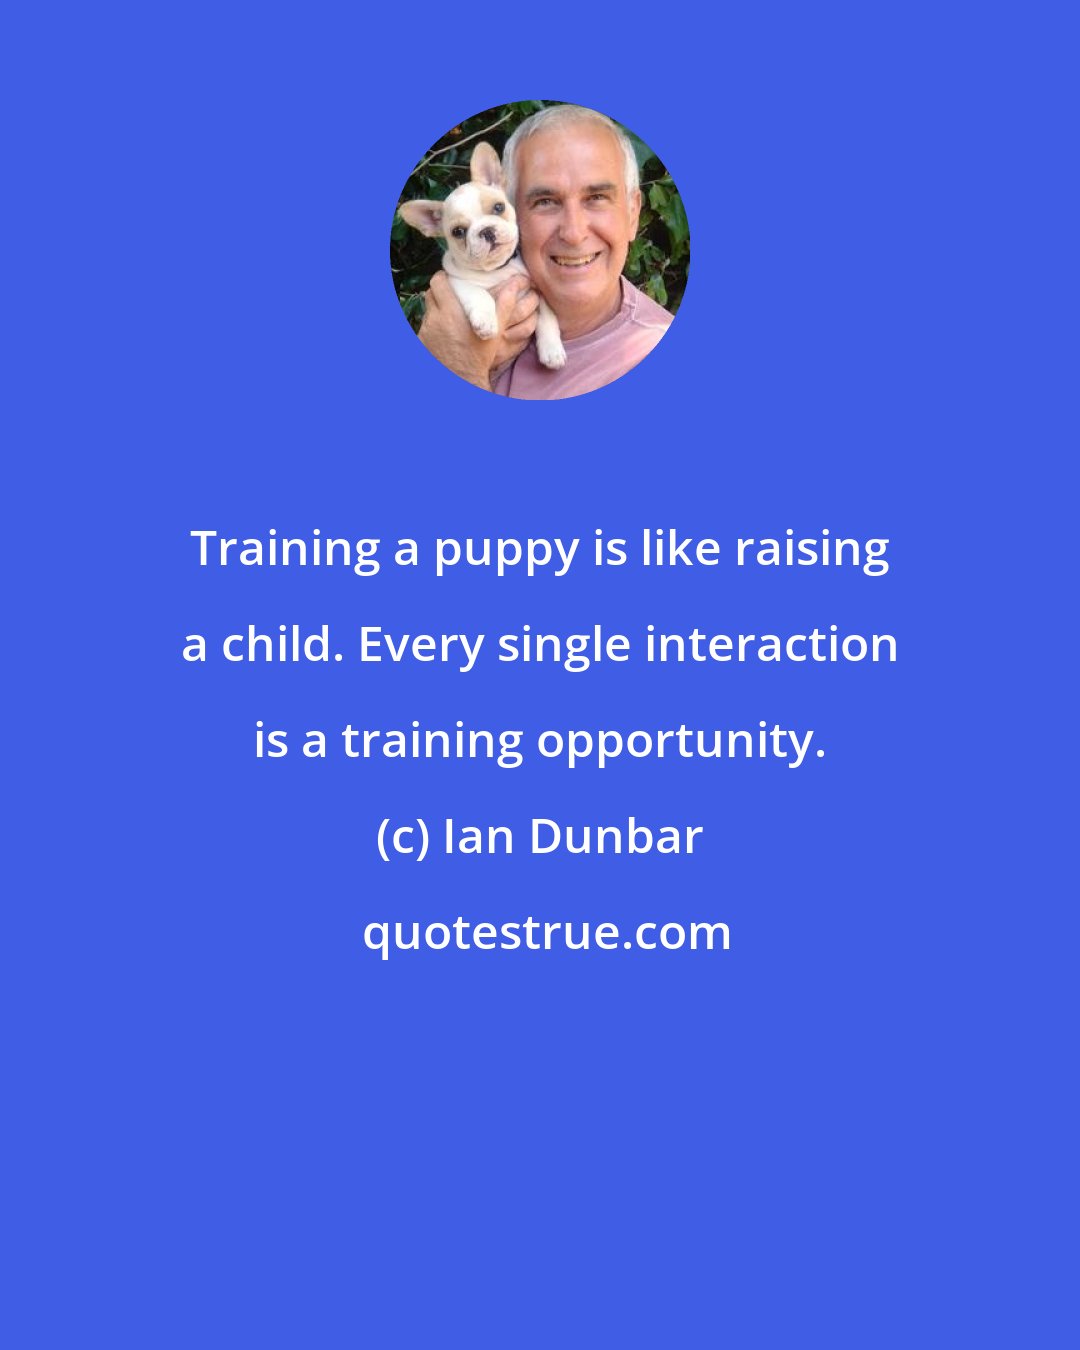 Ian Dunbar: Training a puppy is like raising a child. Every single interaction is a training opportunity.